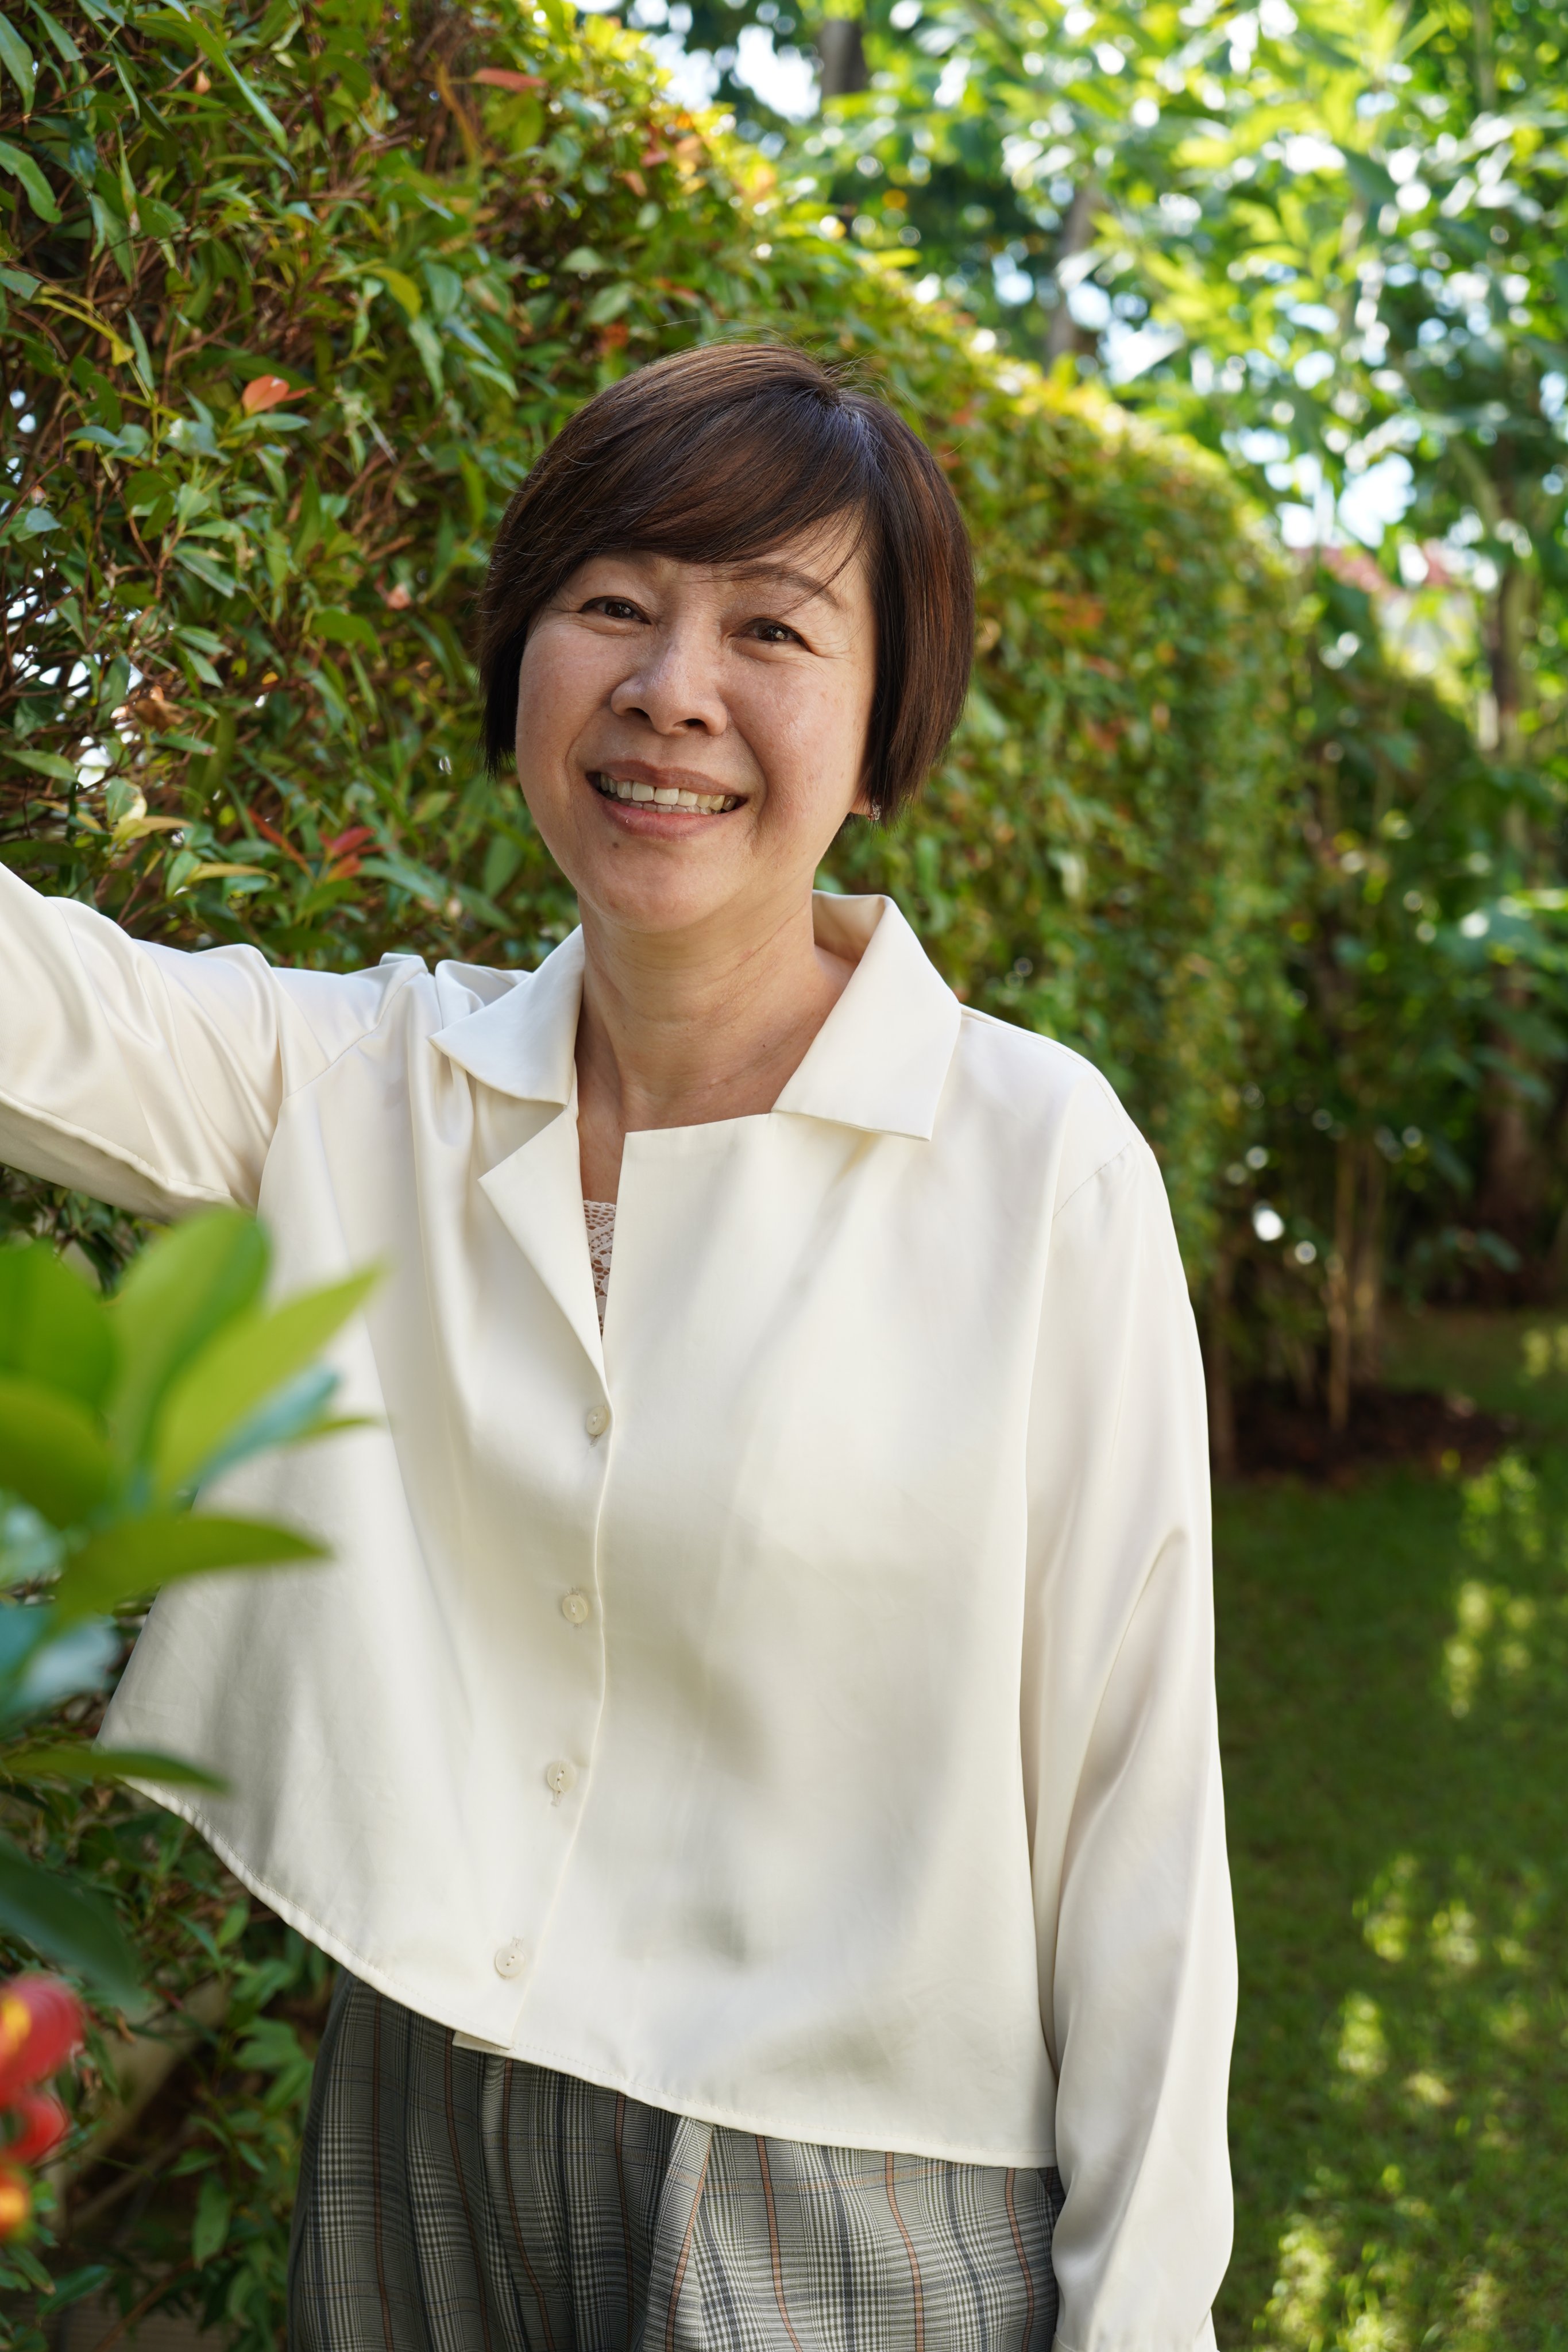 “Passionate learning spirit drives excellence in clinical practice,” says Khim Chew, founder